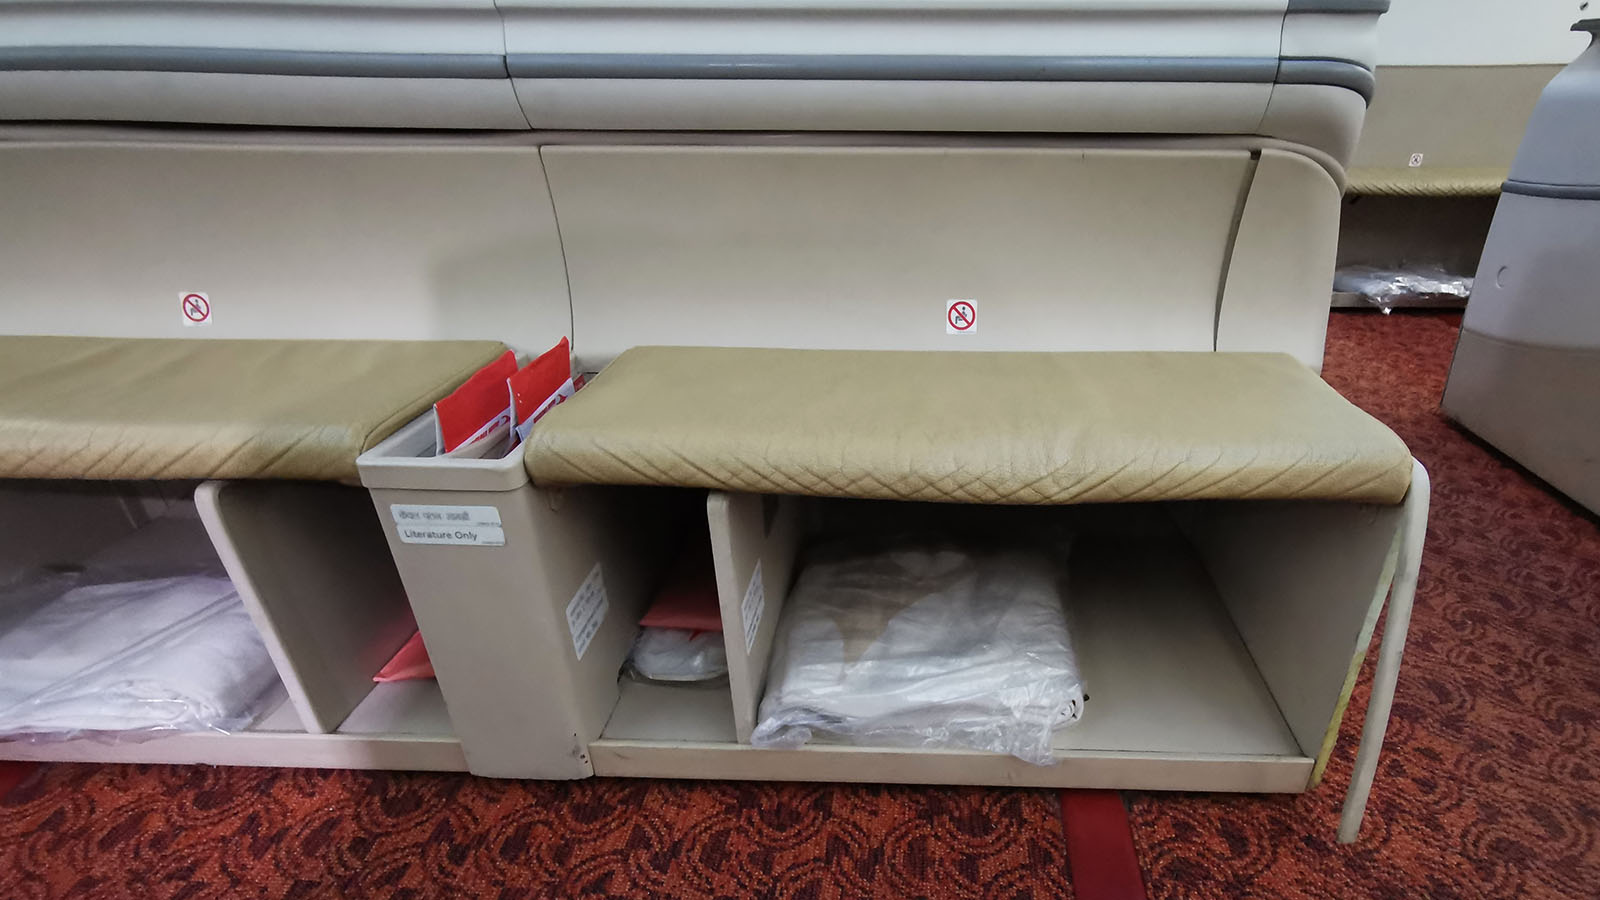 Footrest storage in Air India's Boeing 787 Business Class